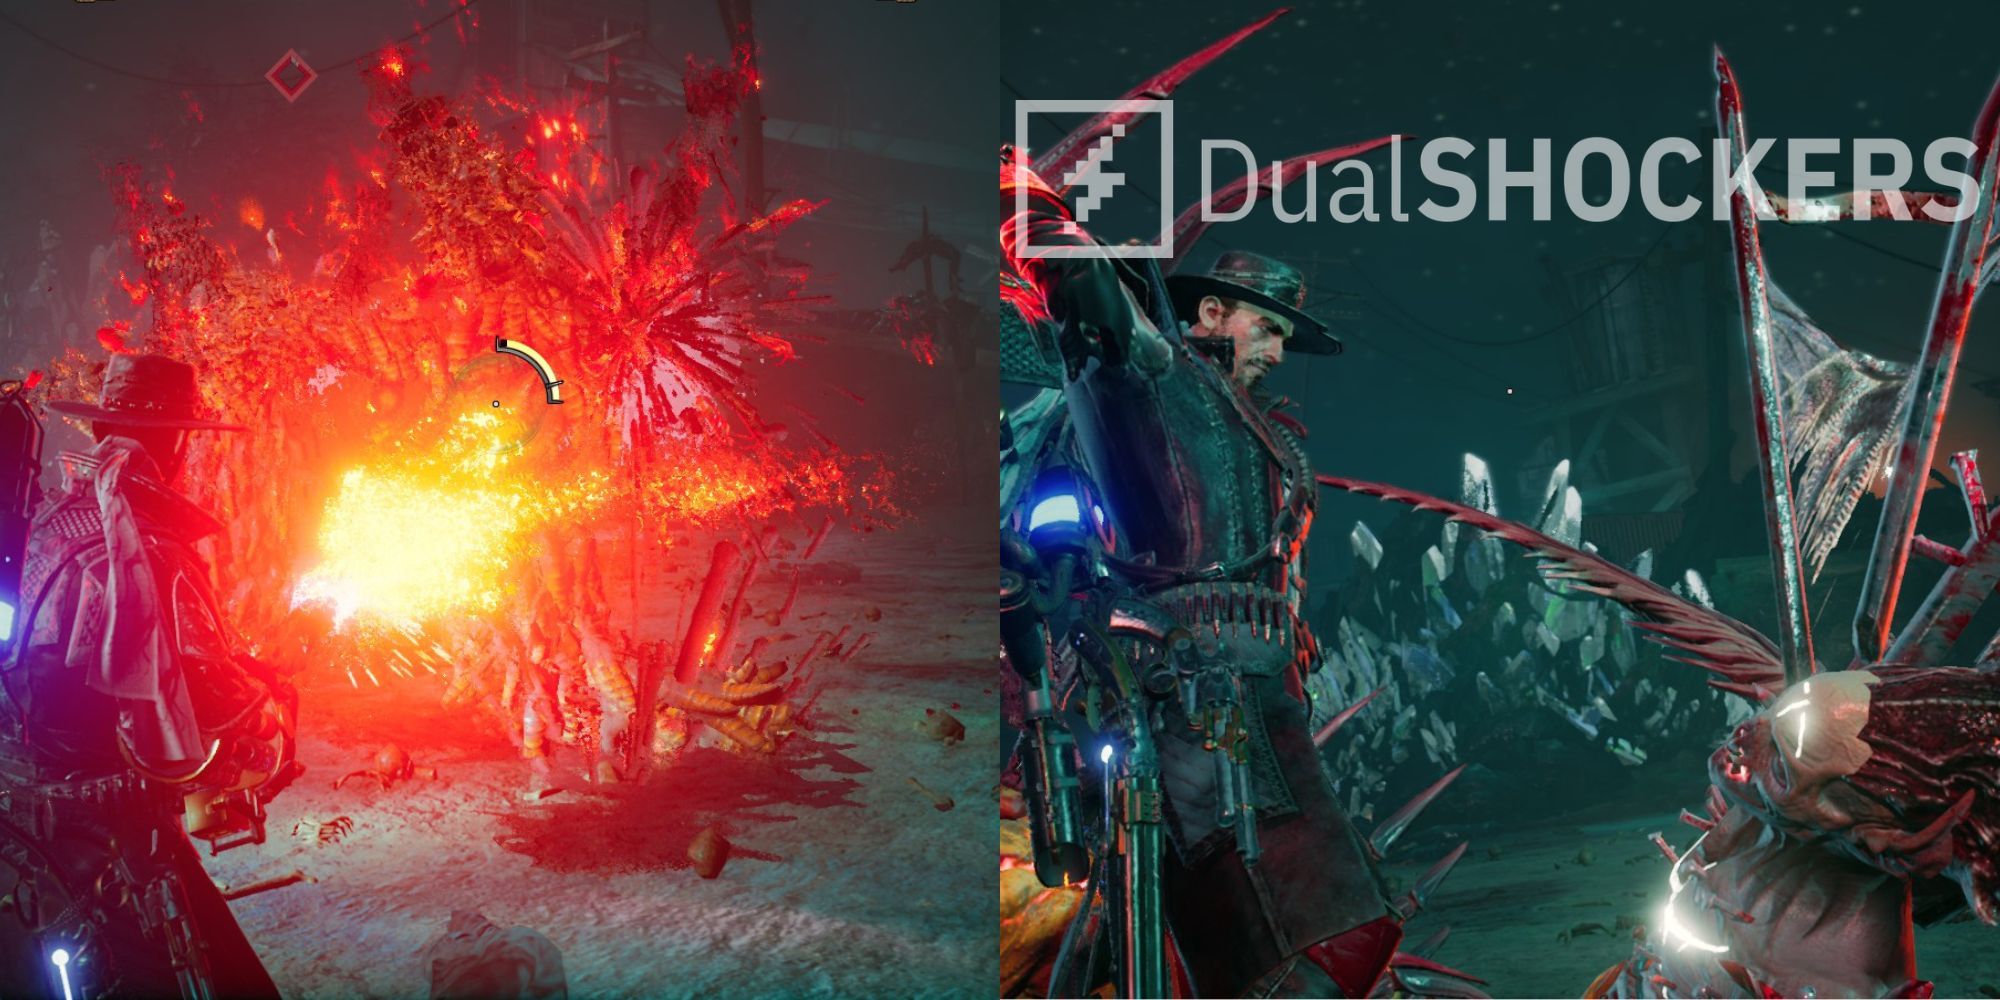 Evil West Bruch feature image with the scorcher flaming down enemies on the left and a finisher move on Bruch on the right